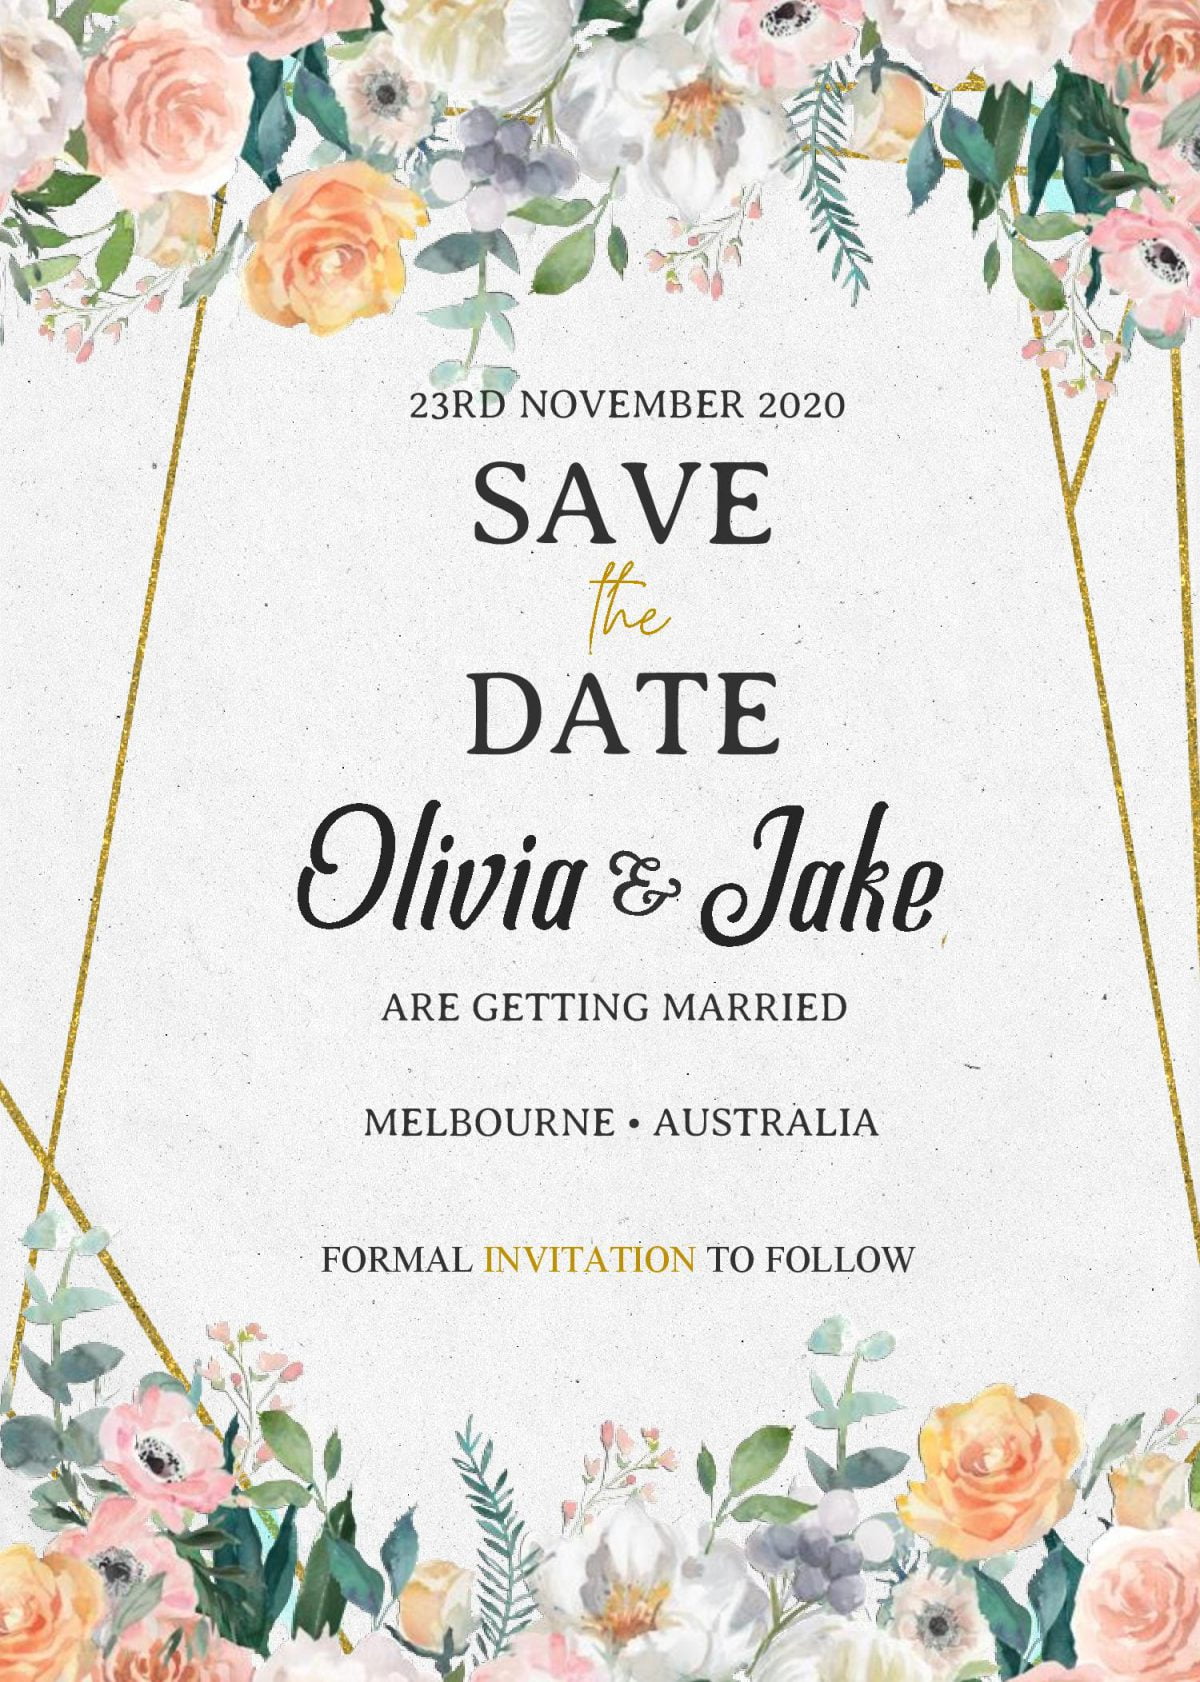 Save The Date Invitation Templates - Editable With MS Word and has blush color scheme